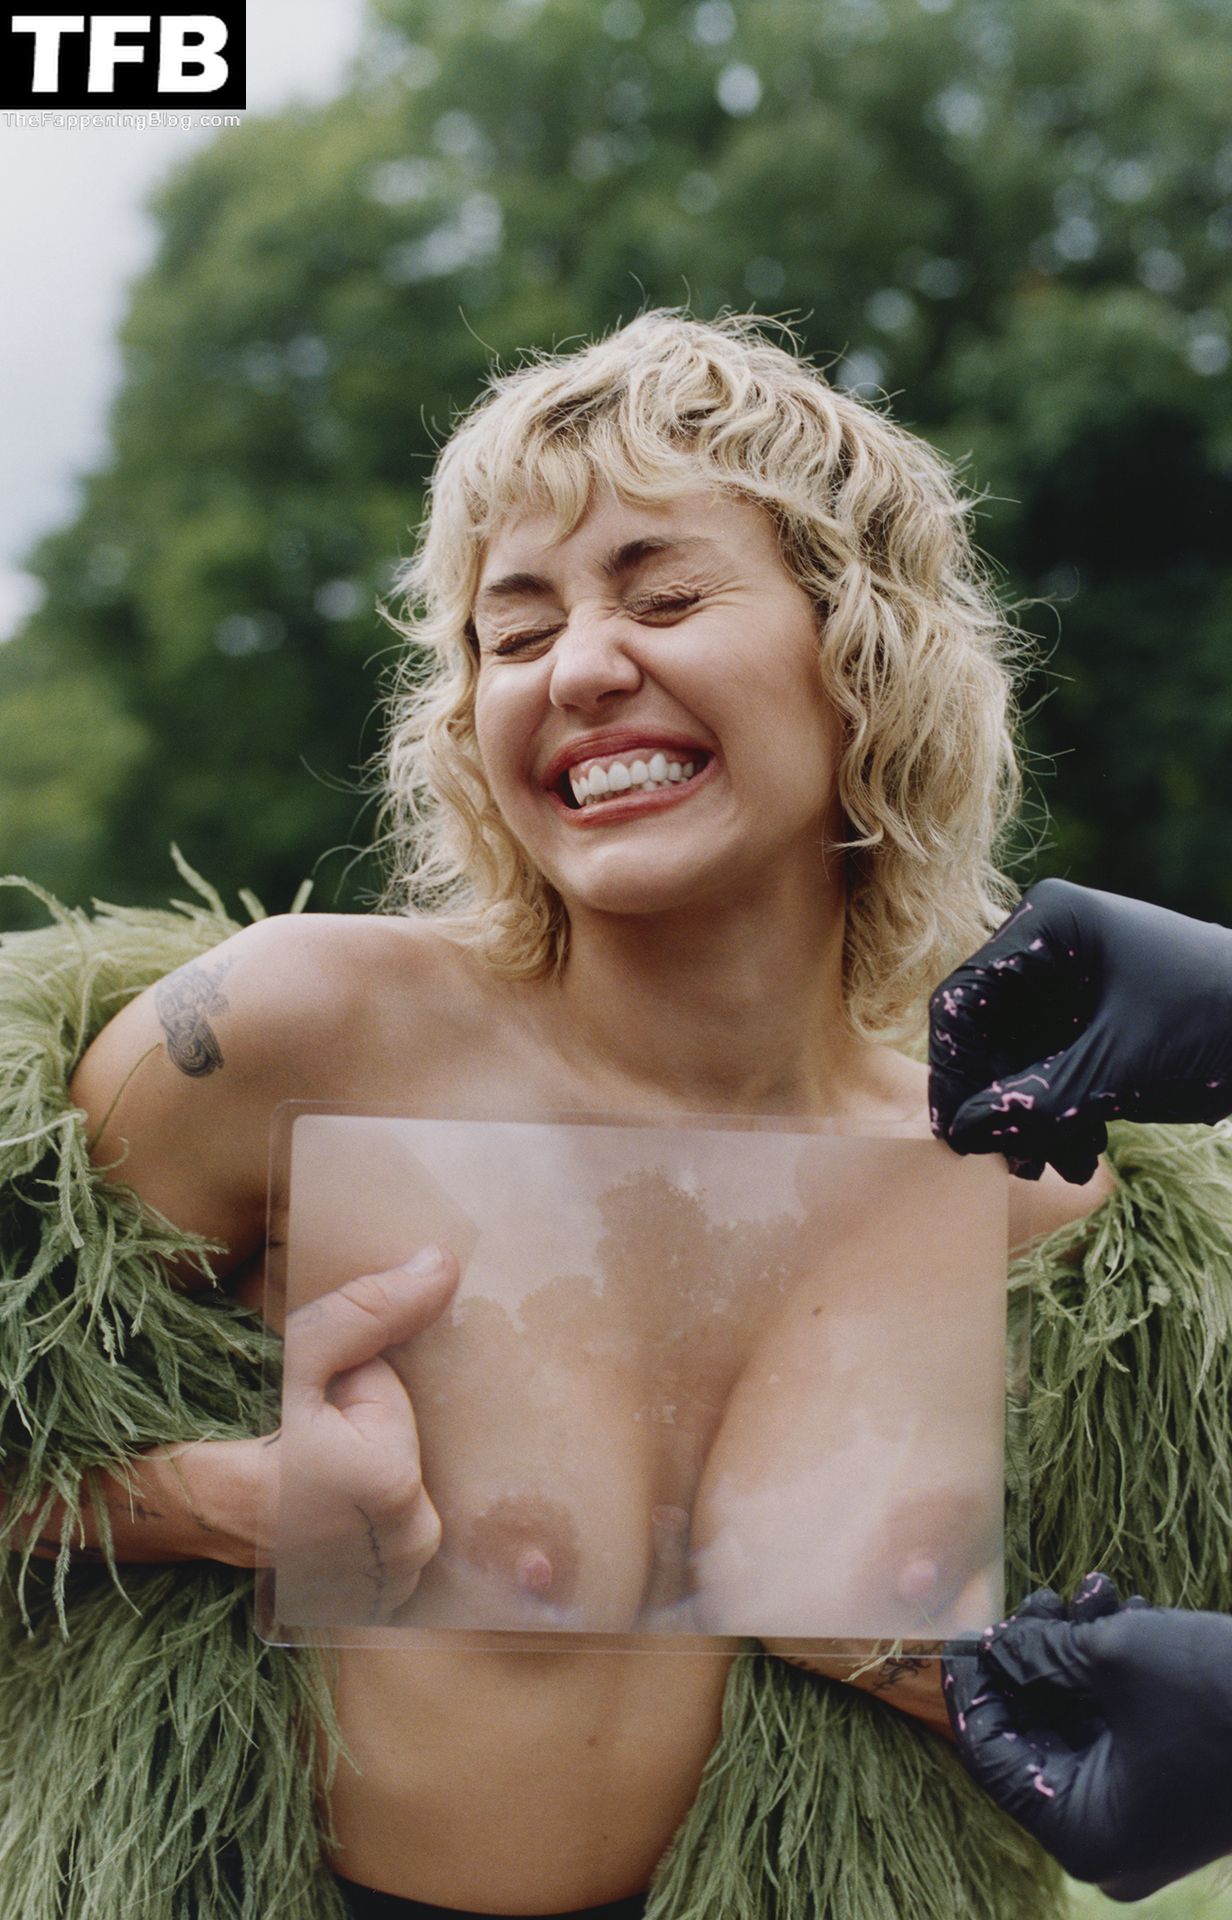 Miley cyrus in playboy naked - Nude photos